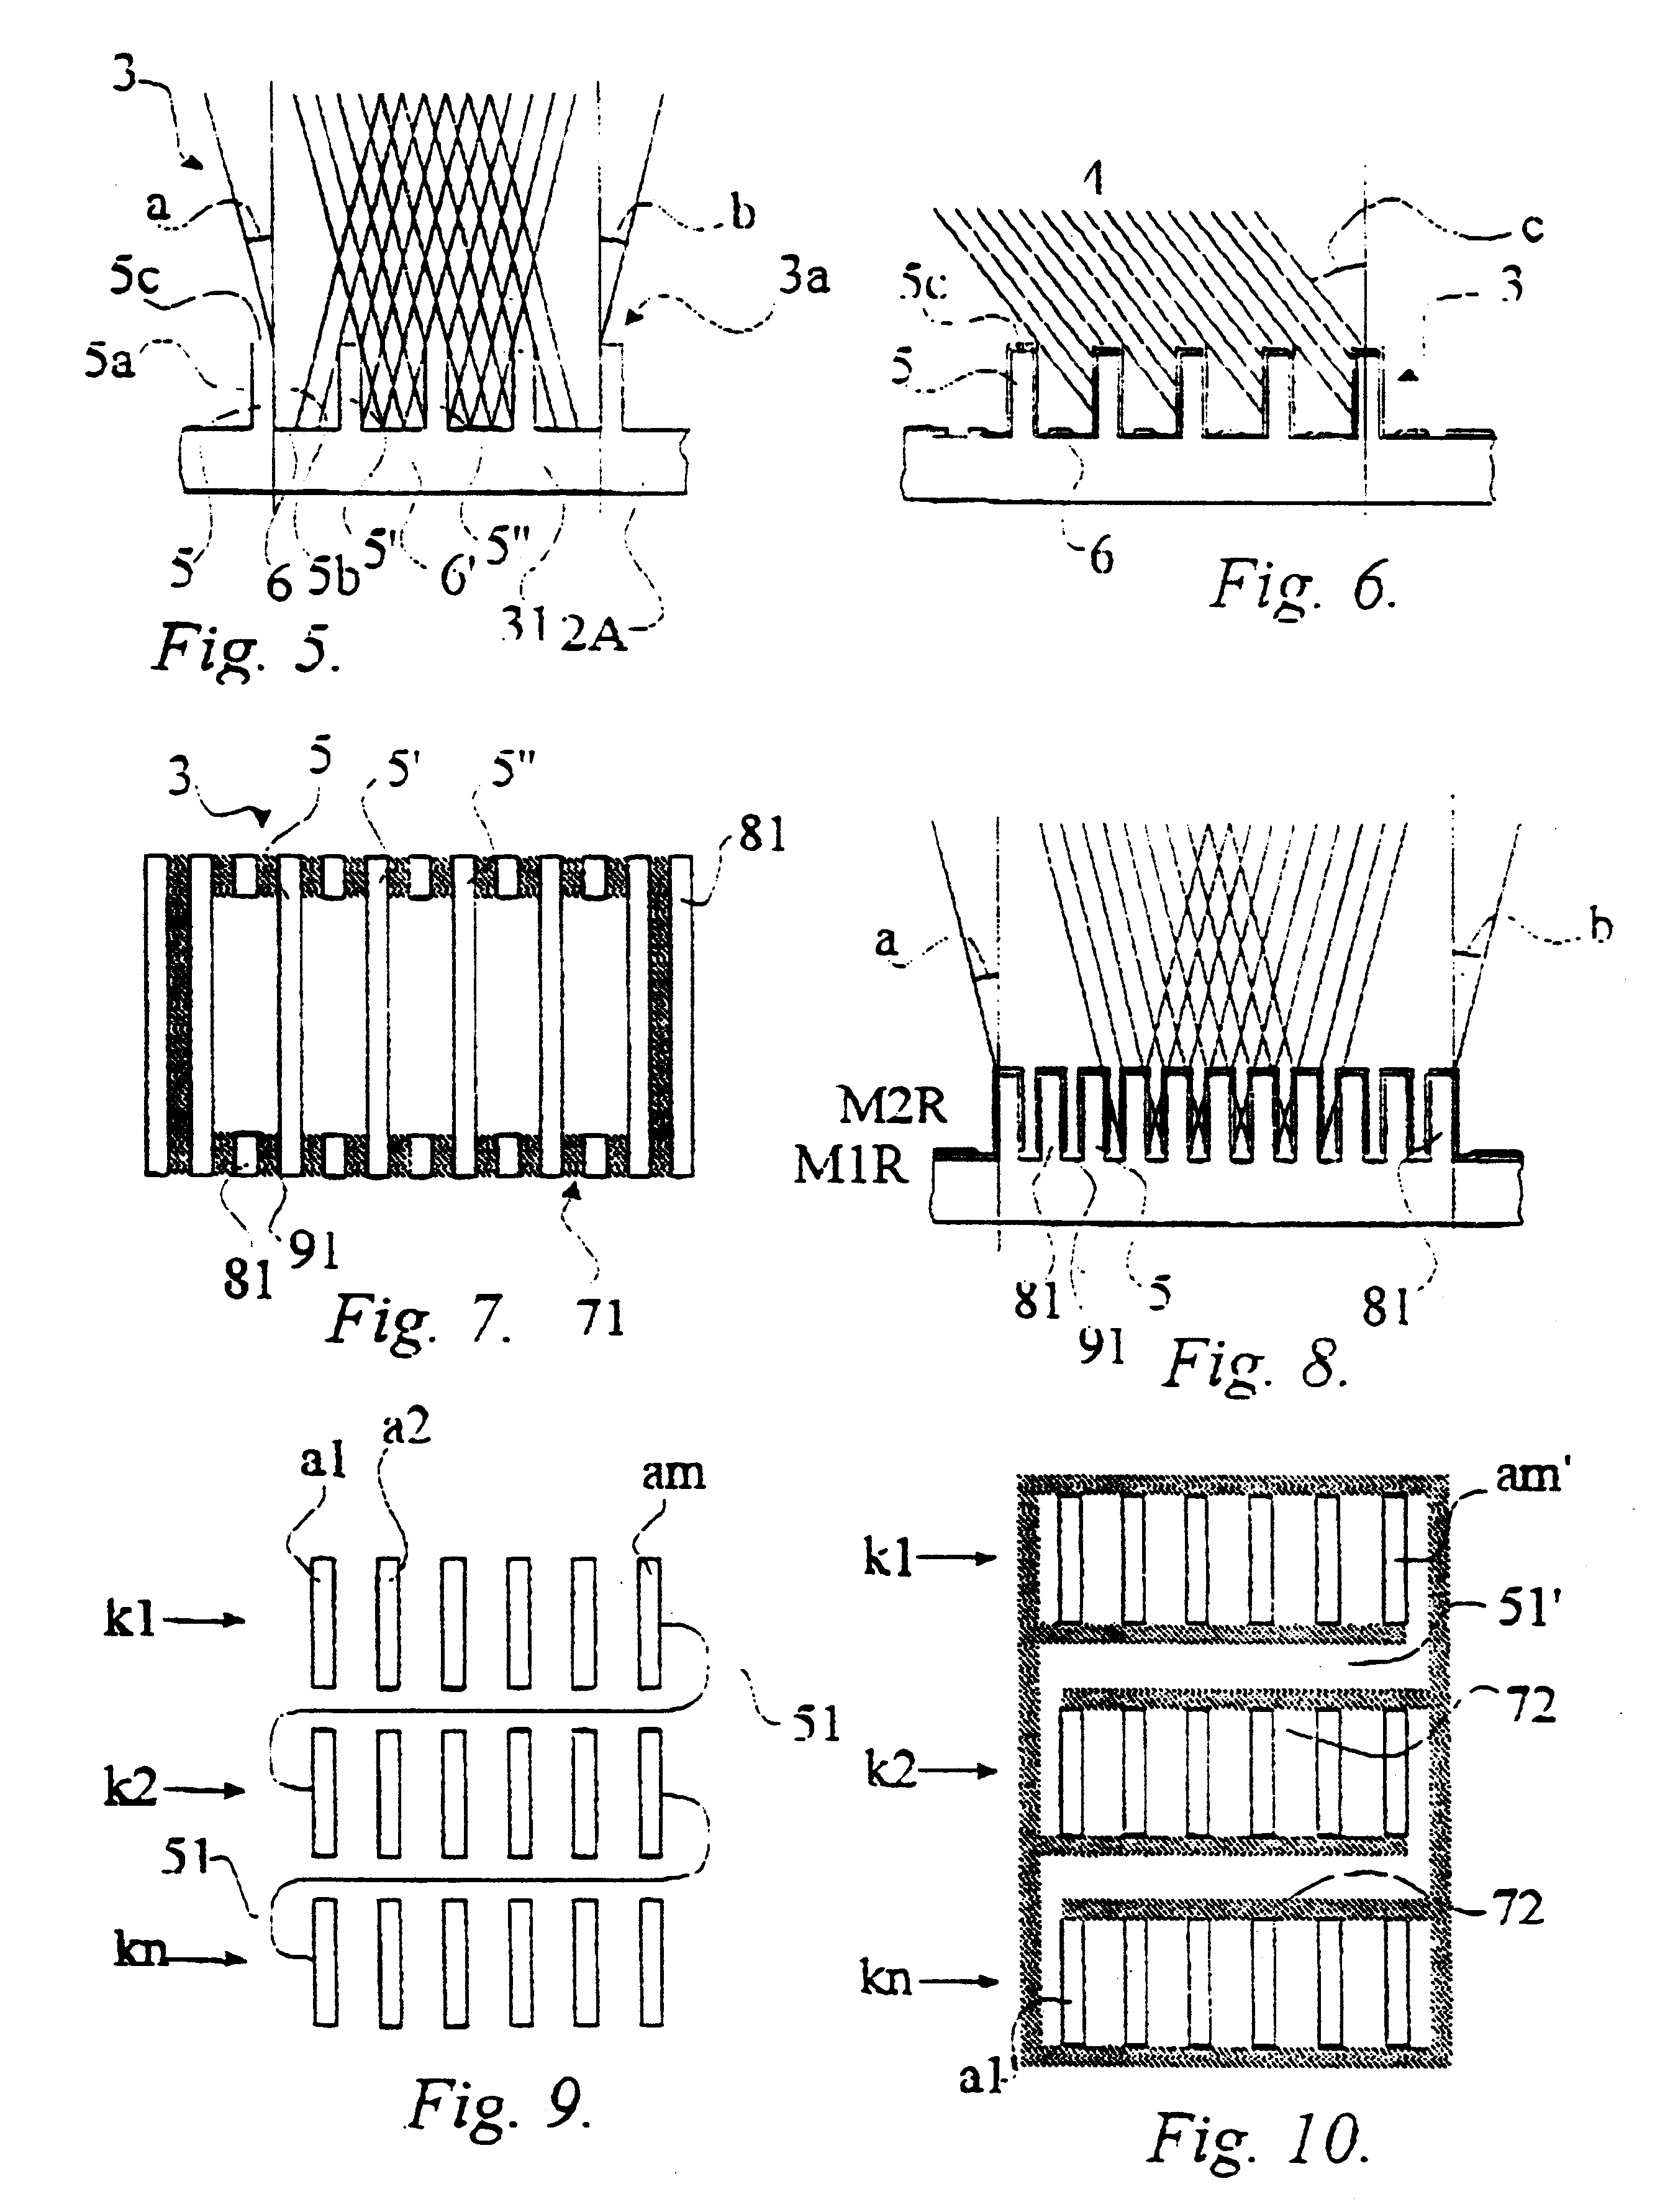 Method of component manufacture